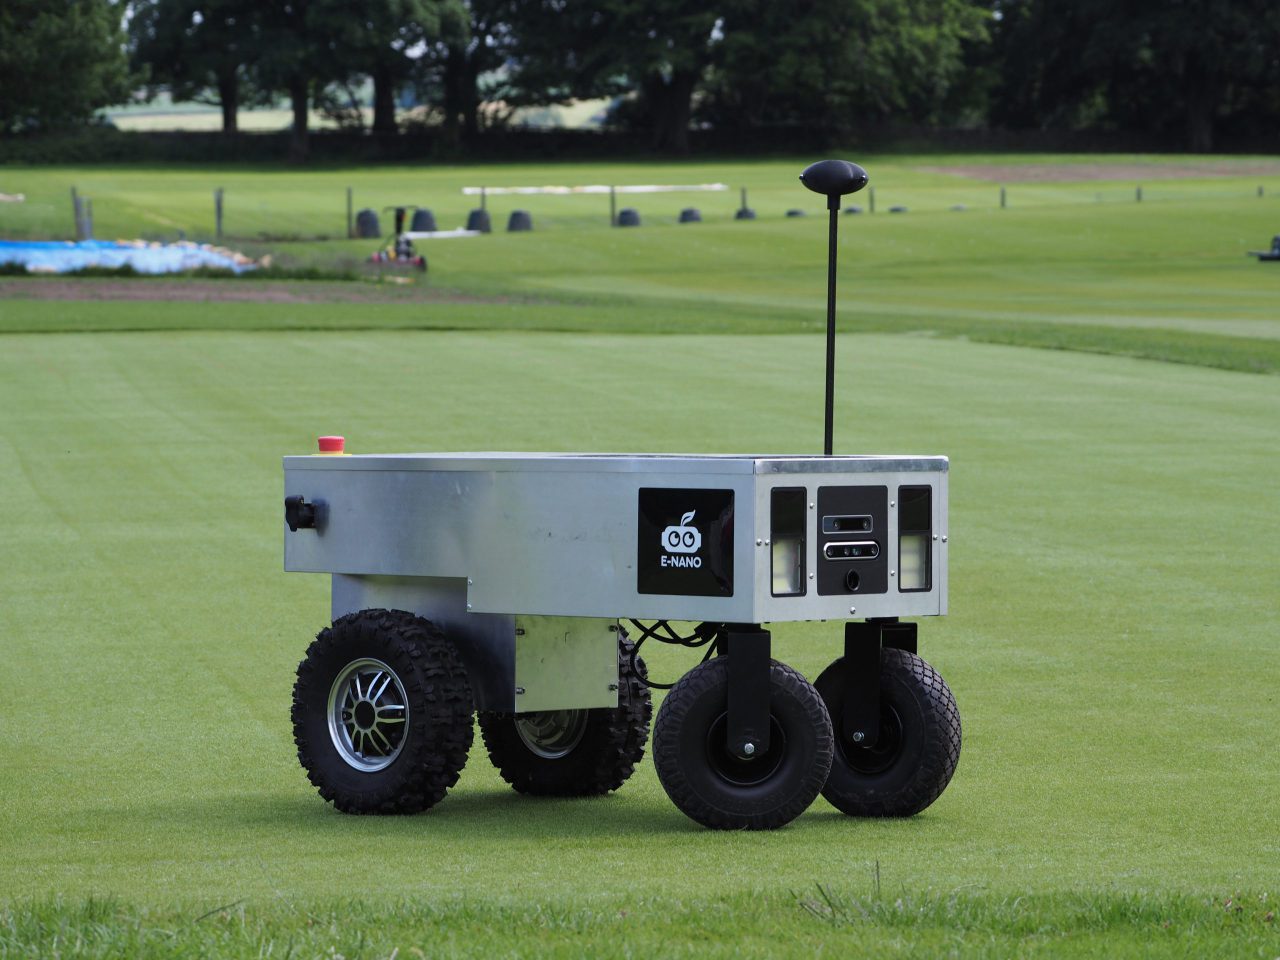 <strong>E-Nano:</strong> innovative robots pave the way to more sustainable field management in sports and agriculture